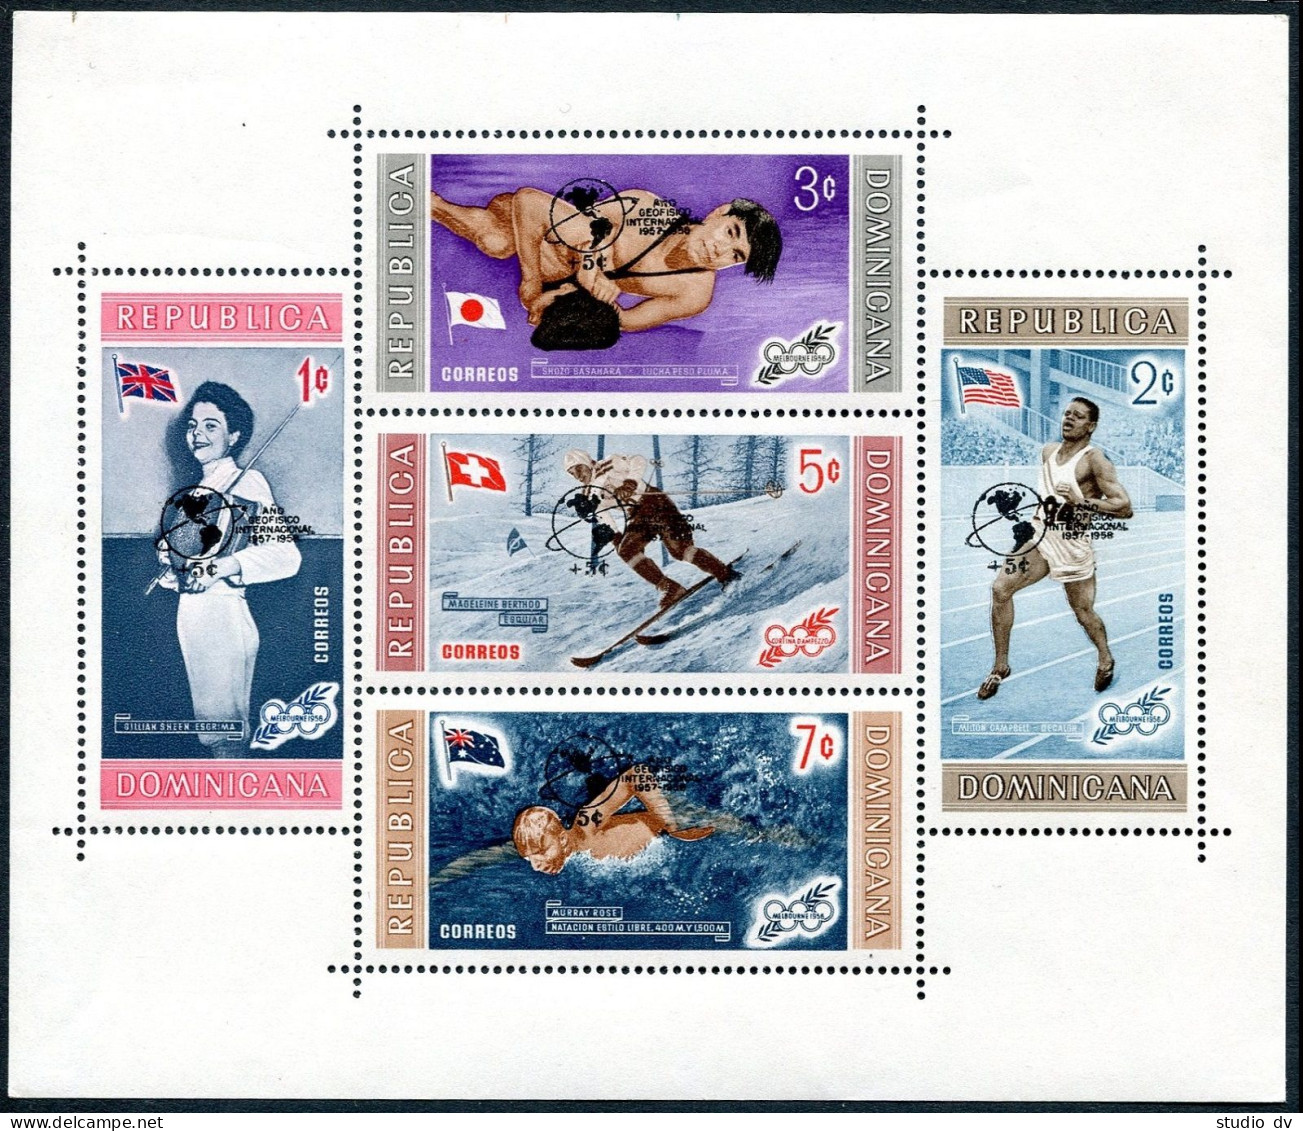 Dominican Rep B25a,CB15a Perf,imperf,MNH. 1959.IGY-1957.Olympics Melbourne-1956. - Dominikanische Rep.